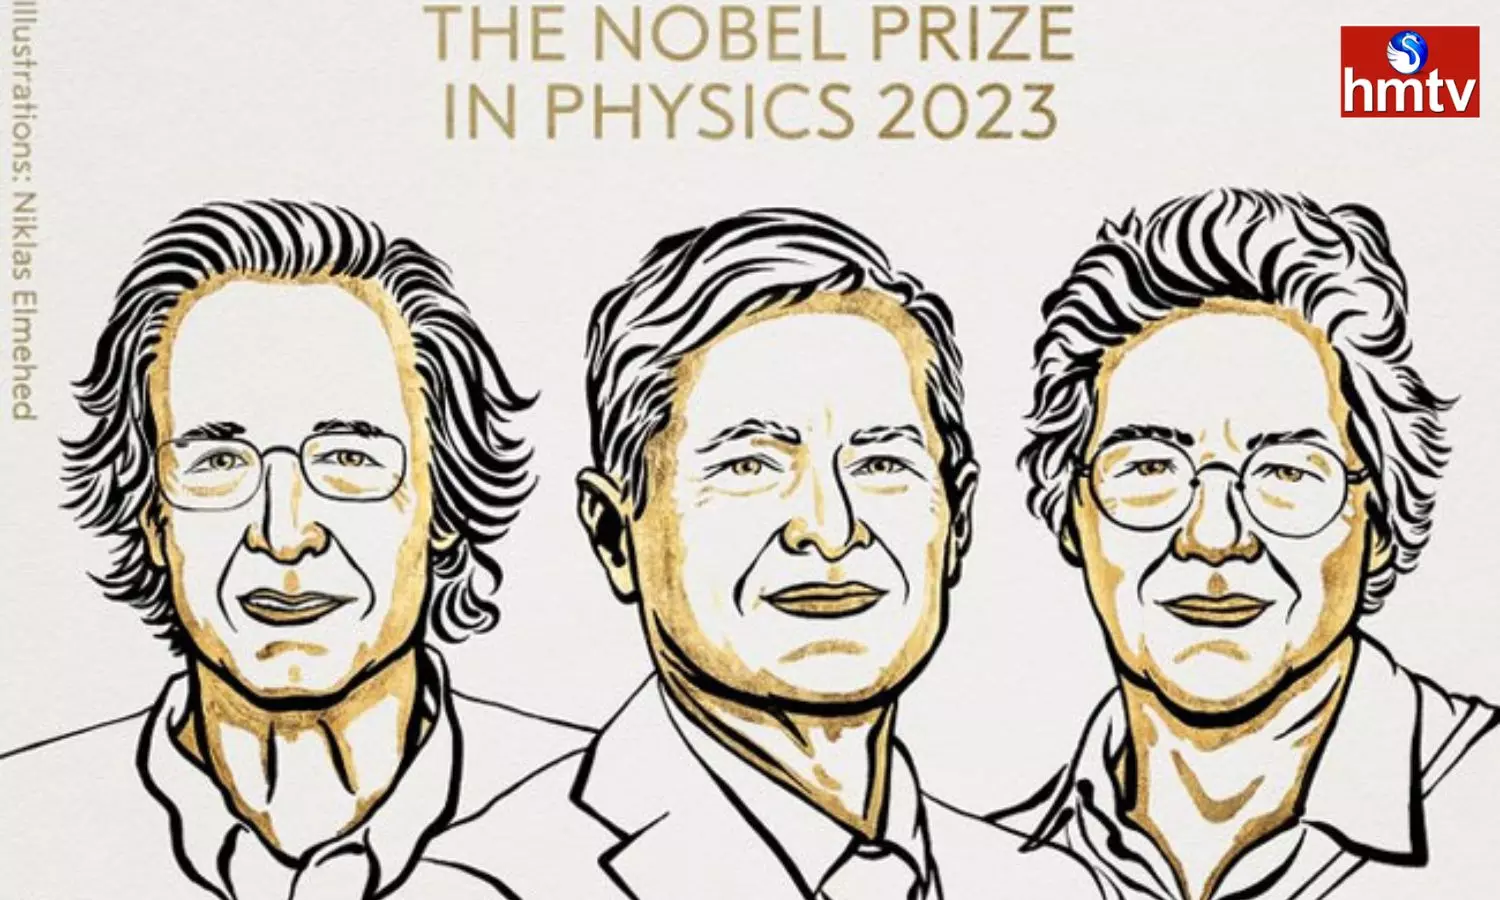 Nobel Prize 2023 Royal Swedish Academy Decided To Award In Physics Pierre Agostini Ferenc Krausz And Anne L Huillier